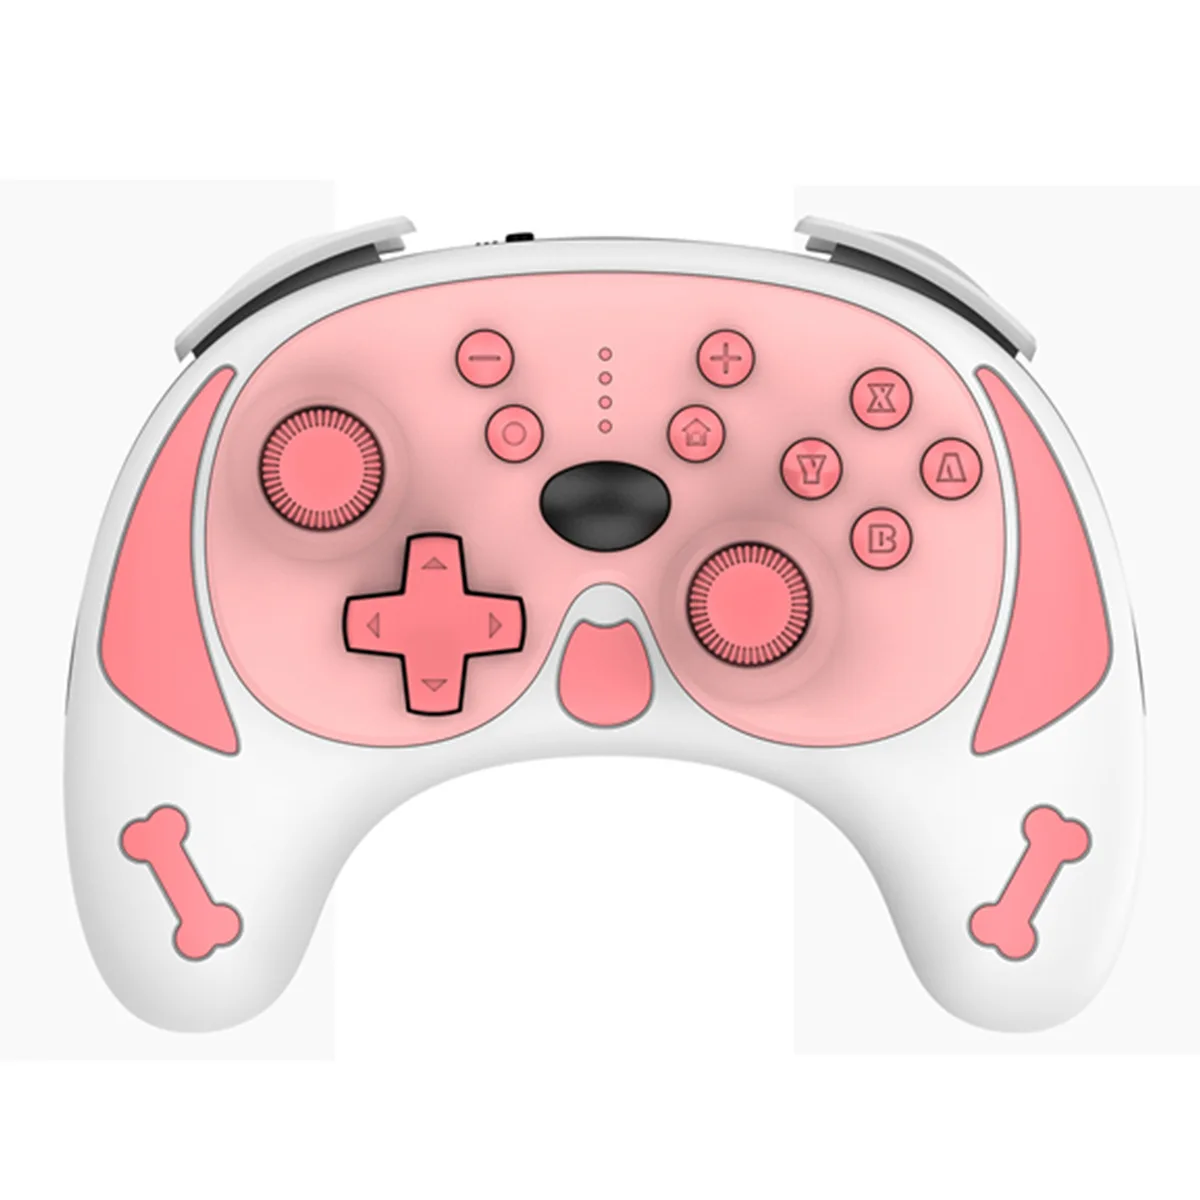 

Switch Pro Wireless BT Gamepad Switch Wireless Pug Handle with Wake-up Function Double Shock Controller, Pink,yellow,white,blue,red